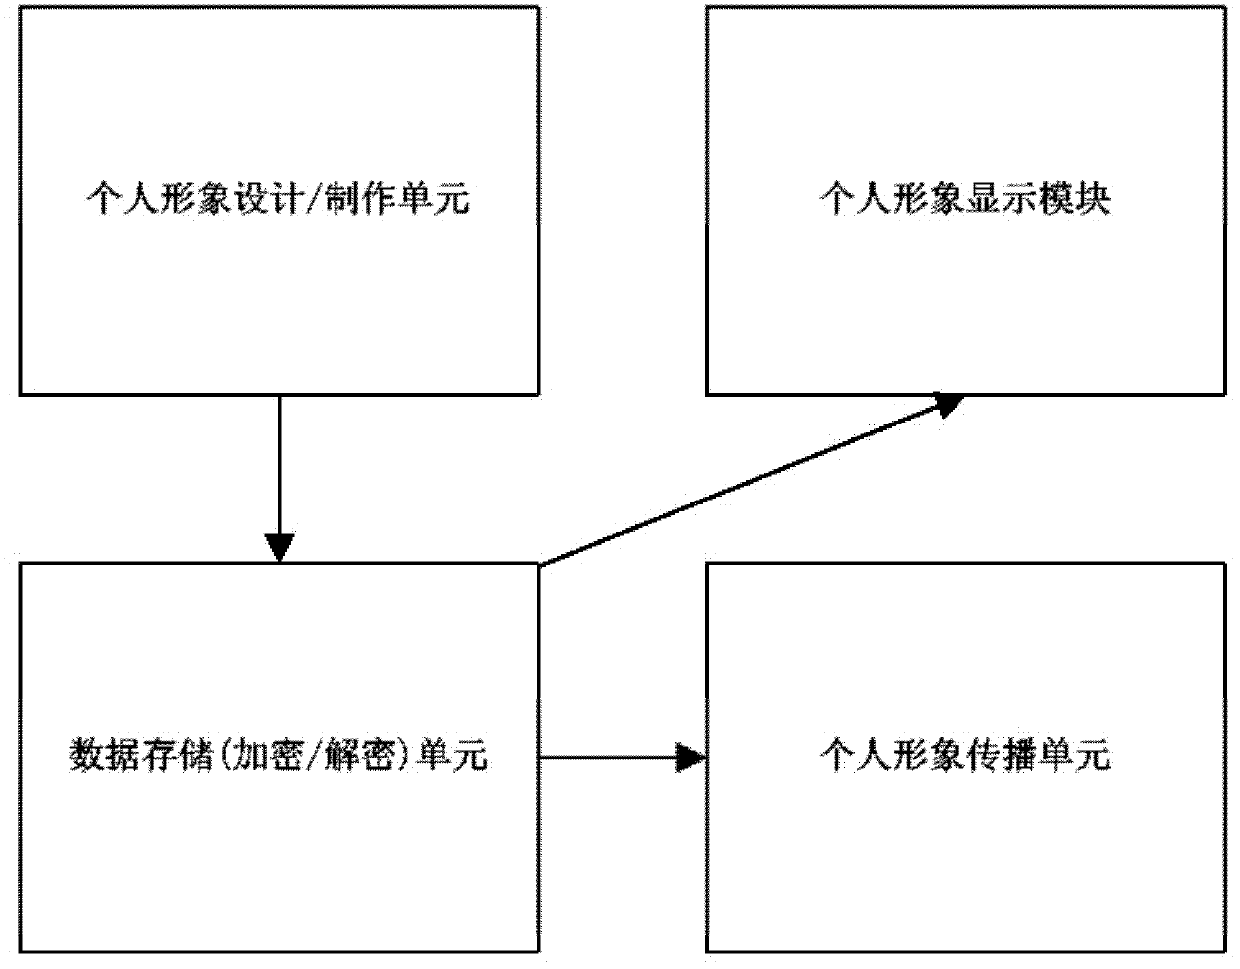 Personal image real-time synchronizing method/ disseminating method based on mobile terminal